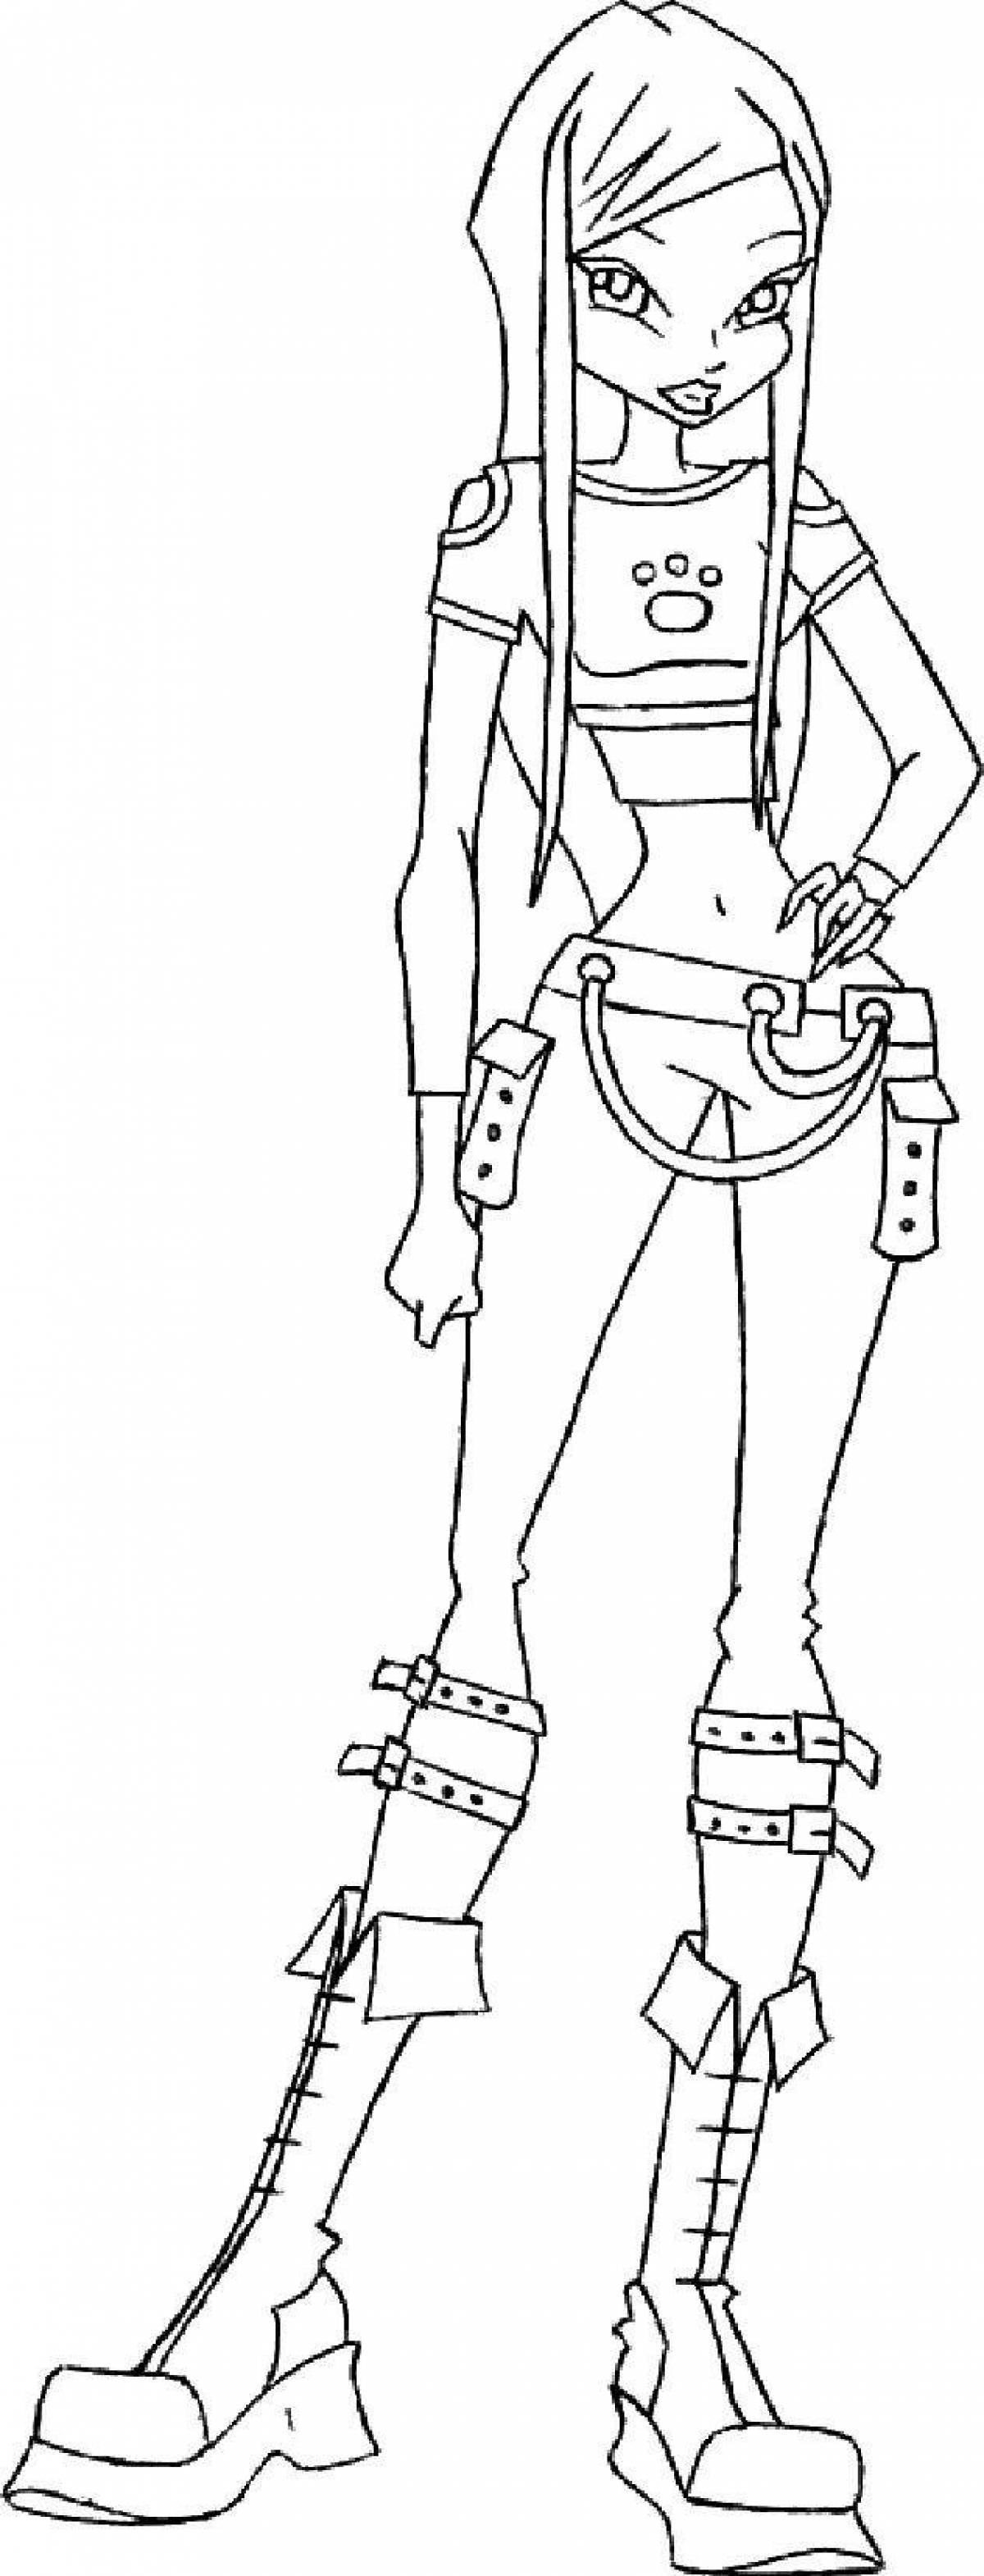 Charming roxy coloring page